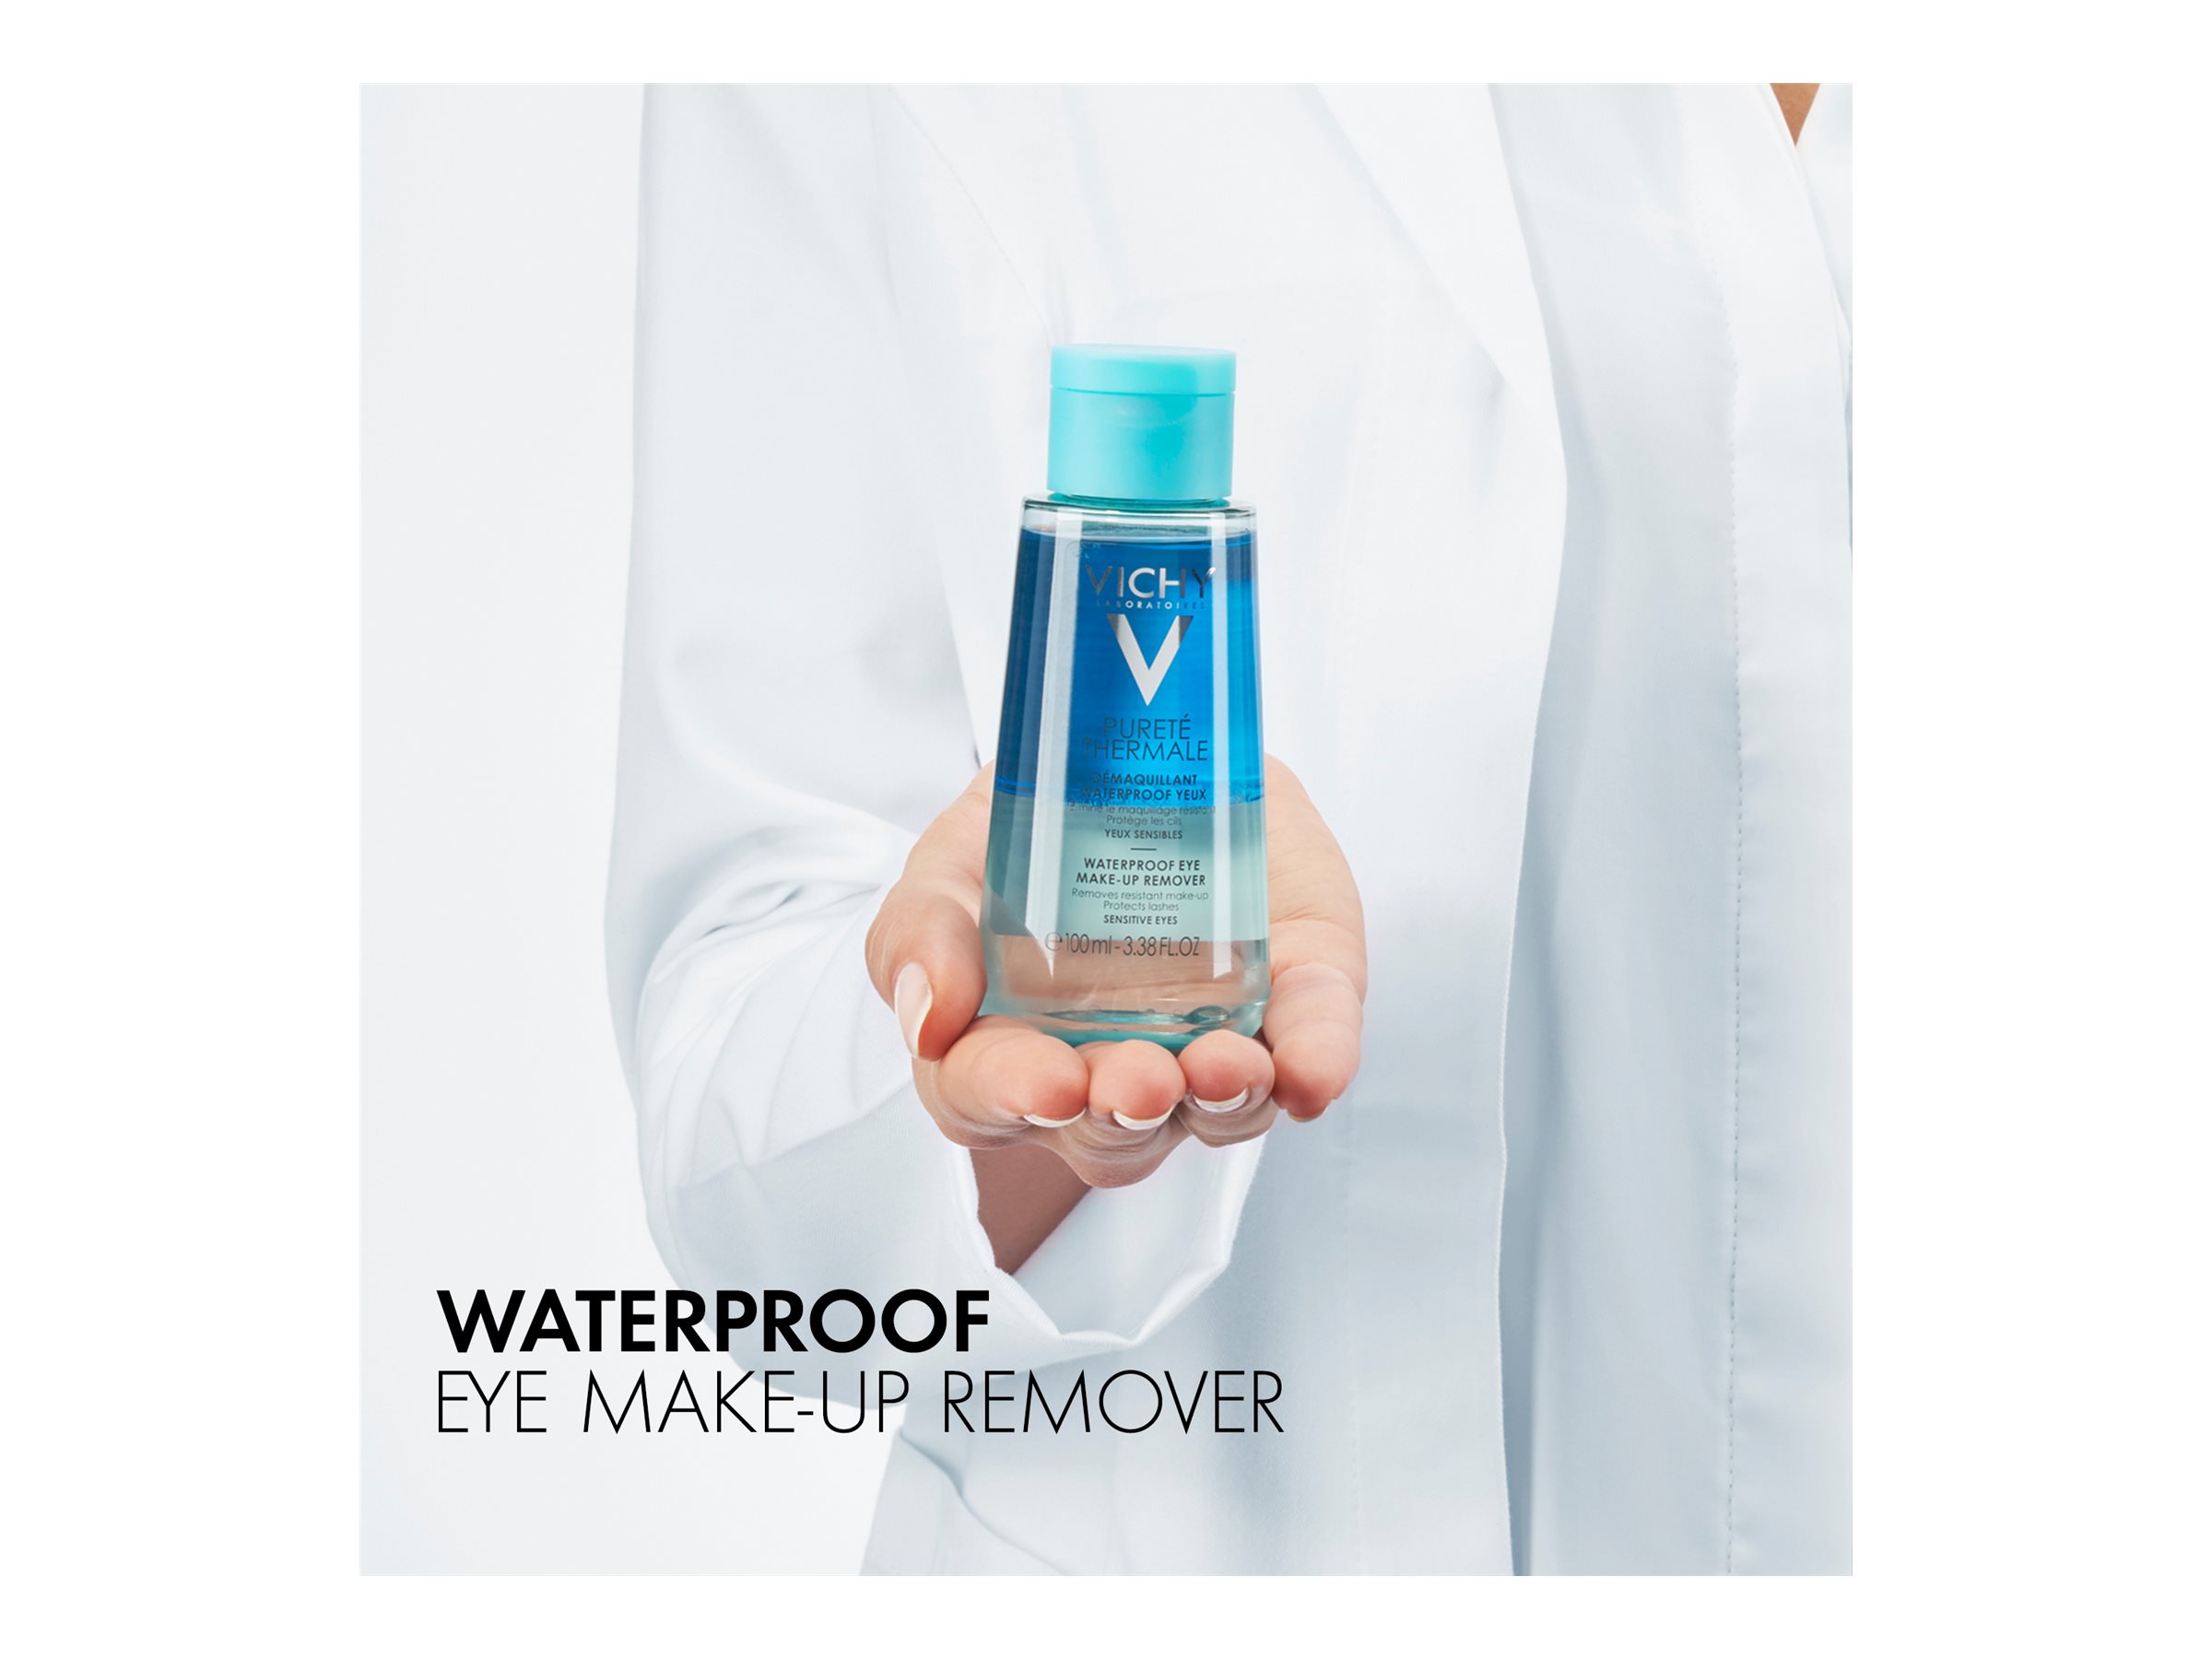 Vichy Purete Thermale Waterproof Eye Make-Up Remover - 100ml